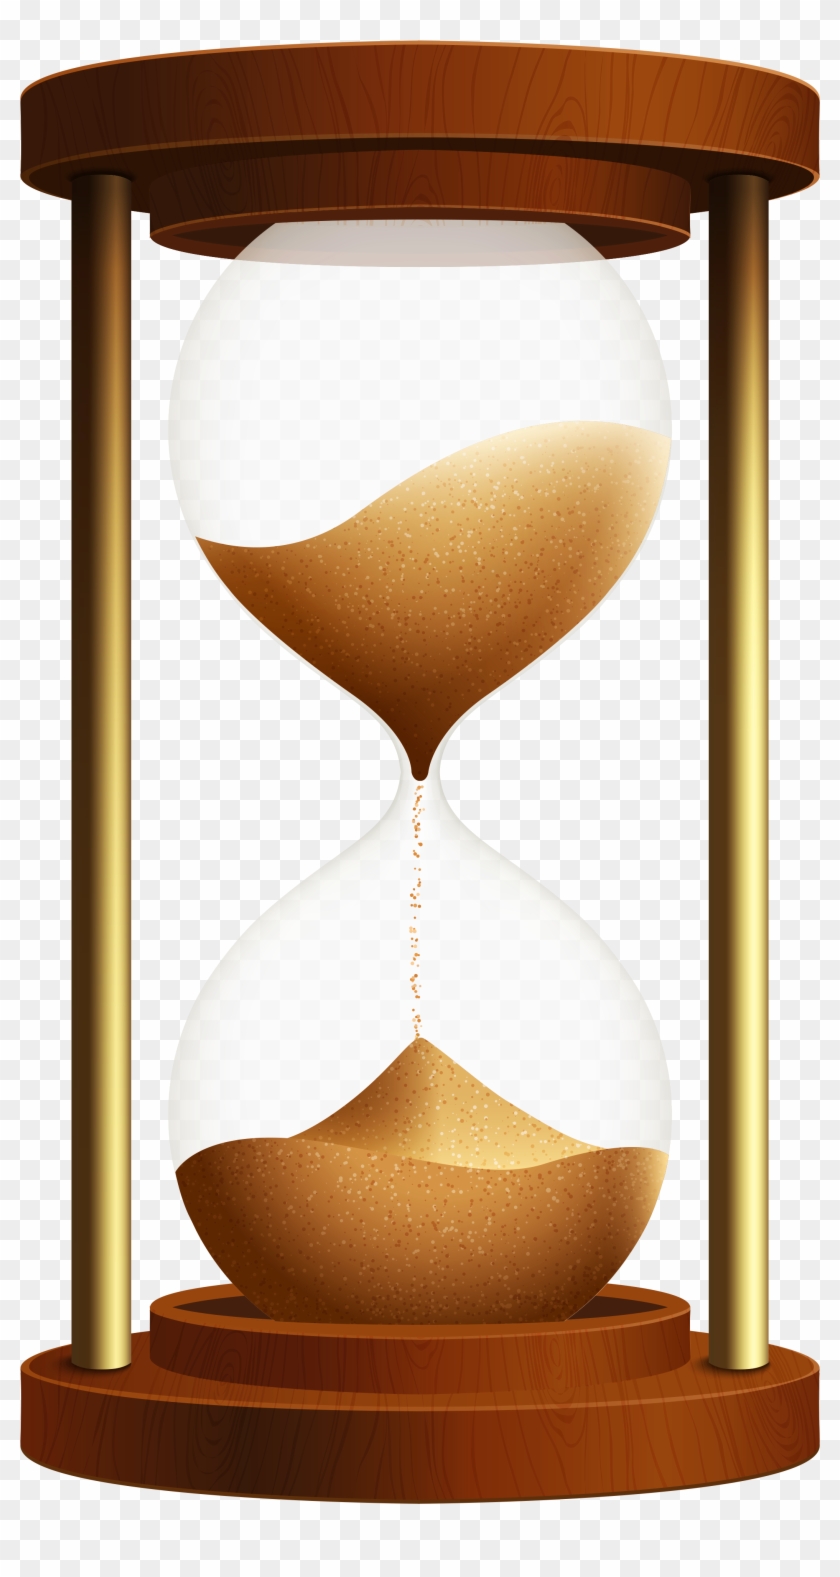 Sand Clock Png Clipart - Sand Clock Png #314949